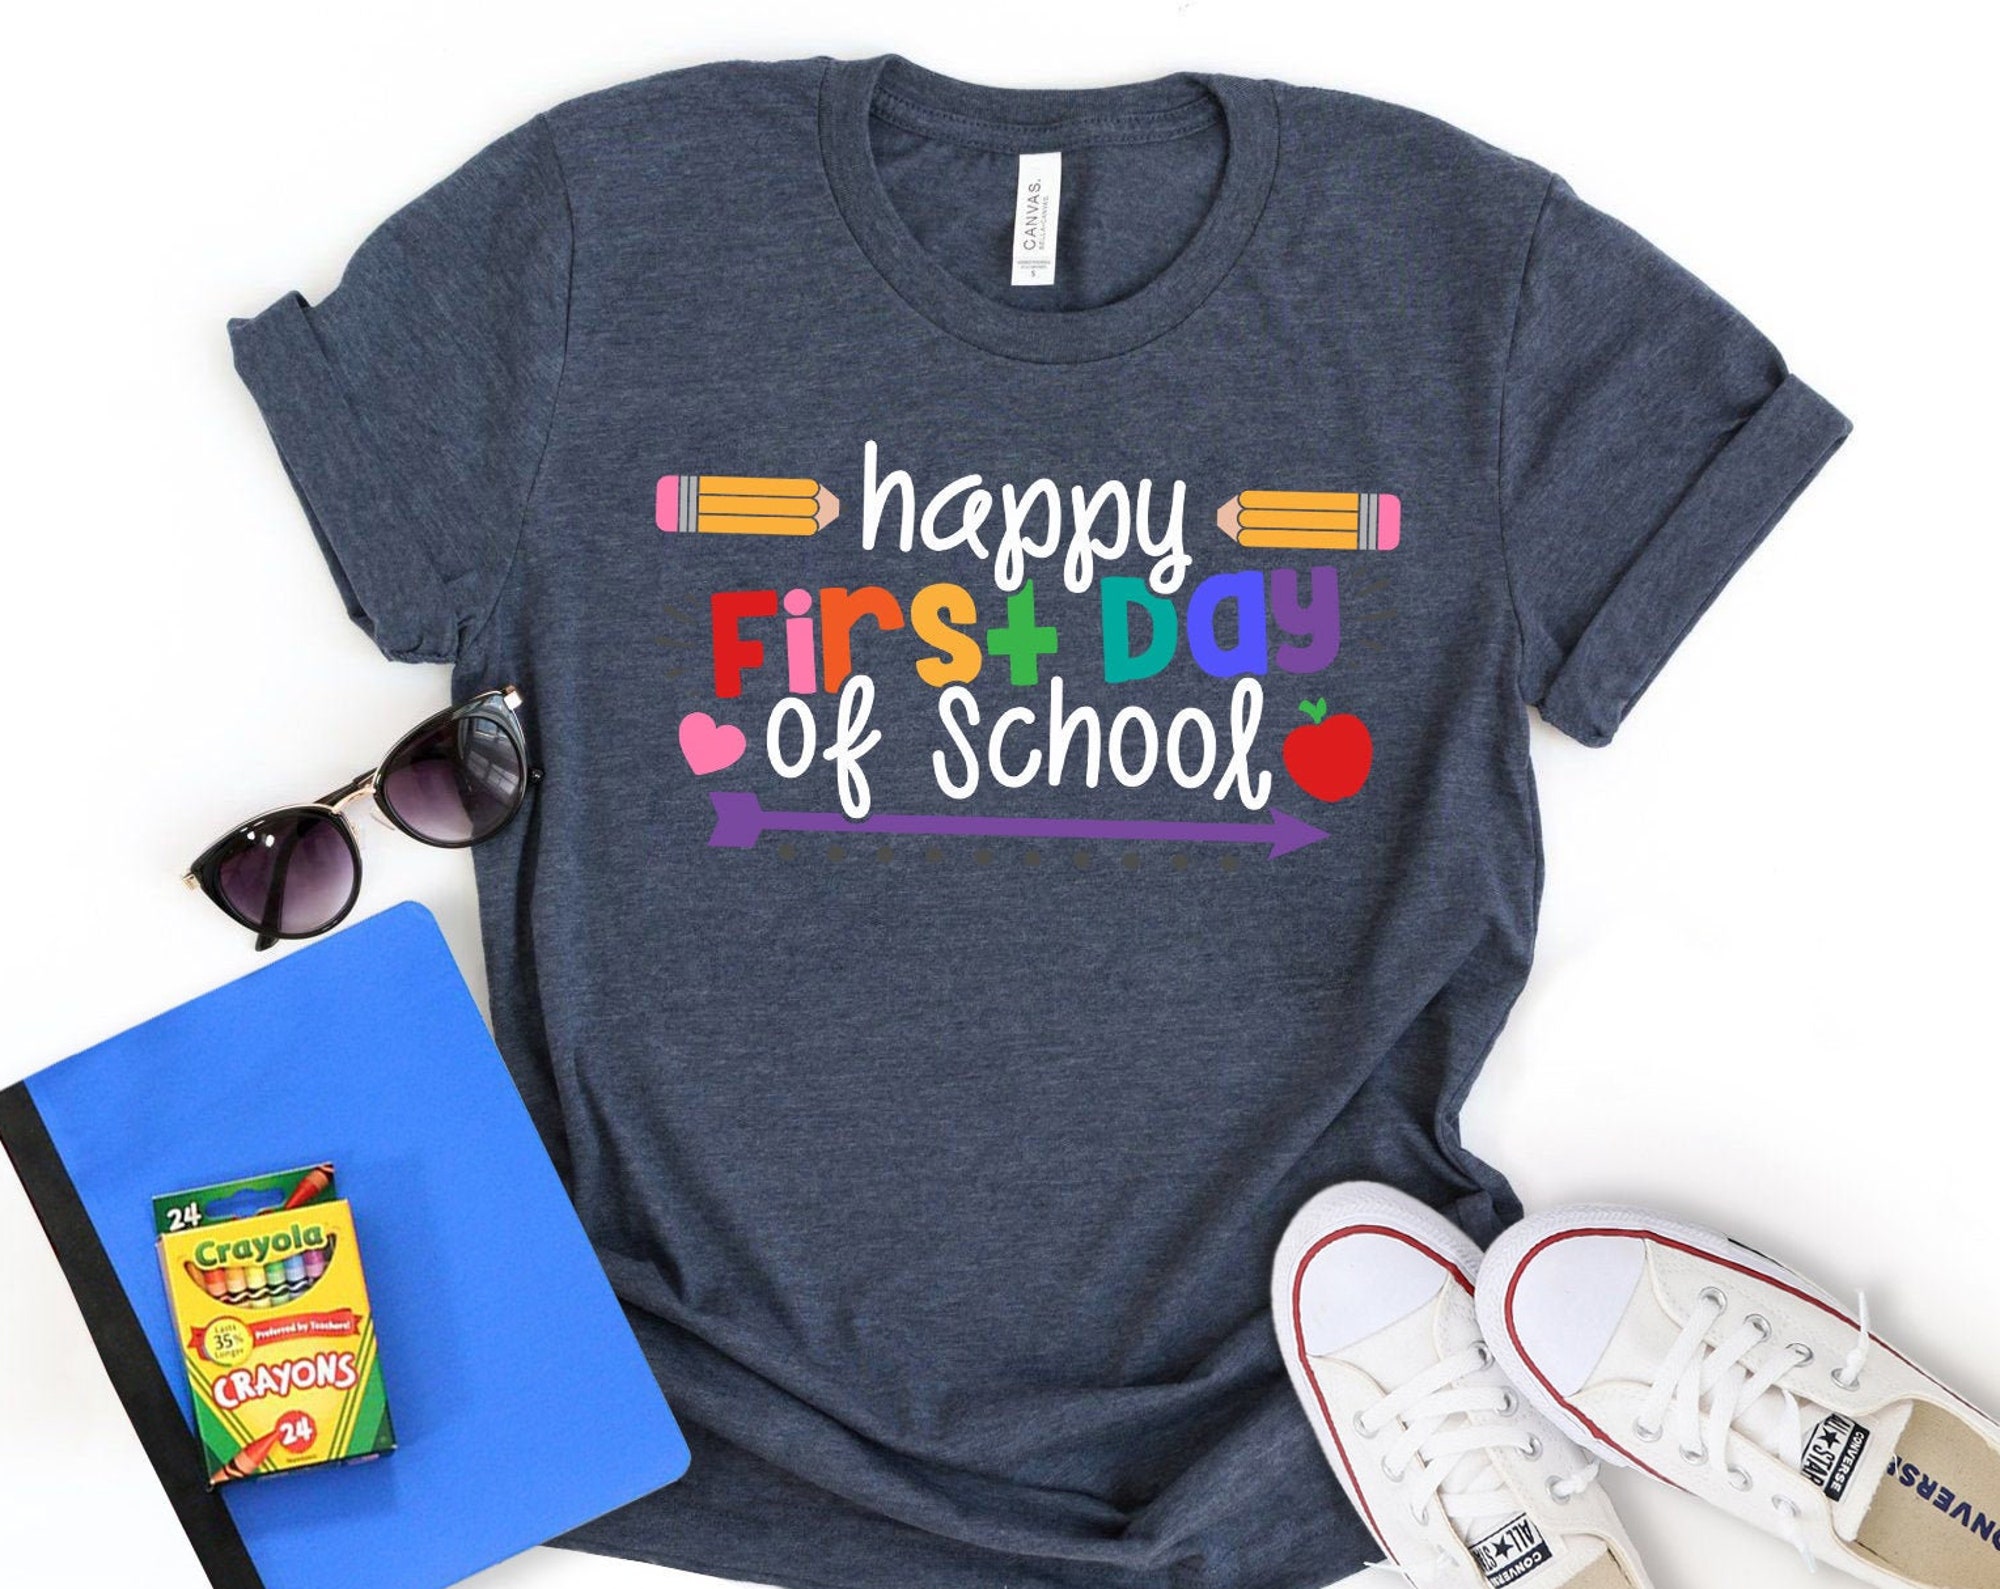 First Day of School Shirt - Happy First Day of School Shirt